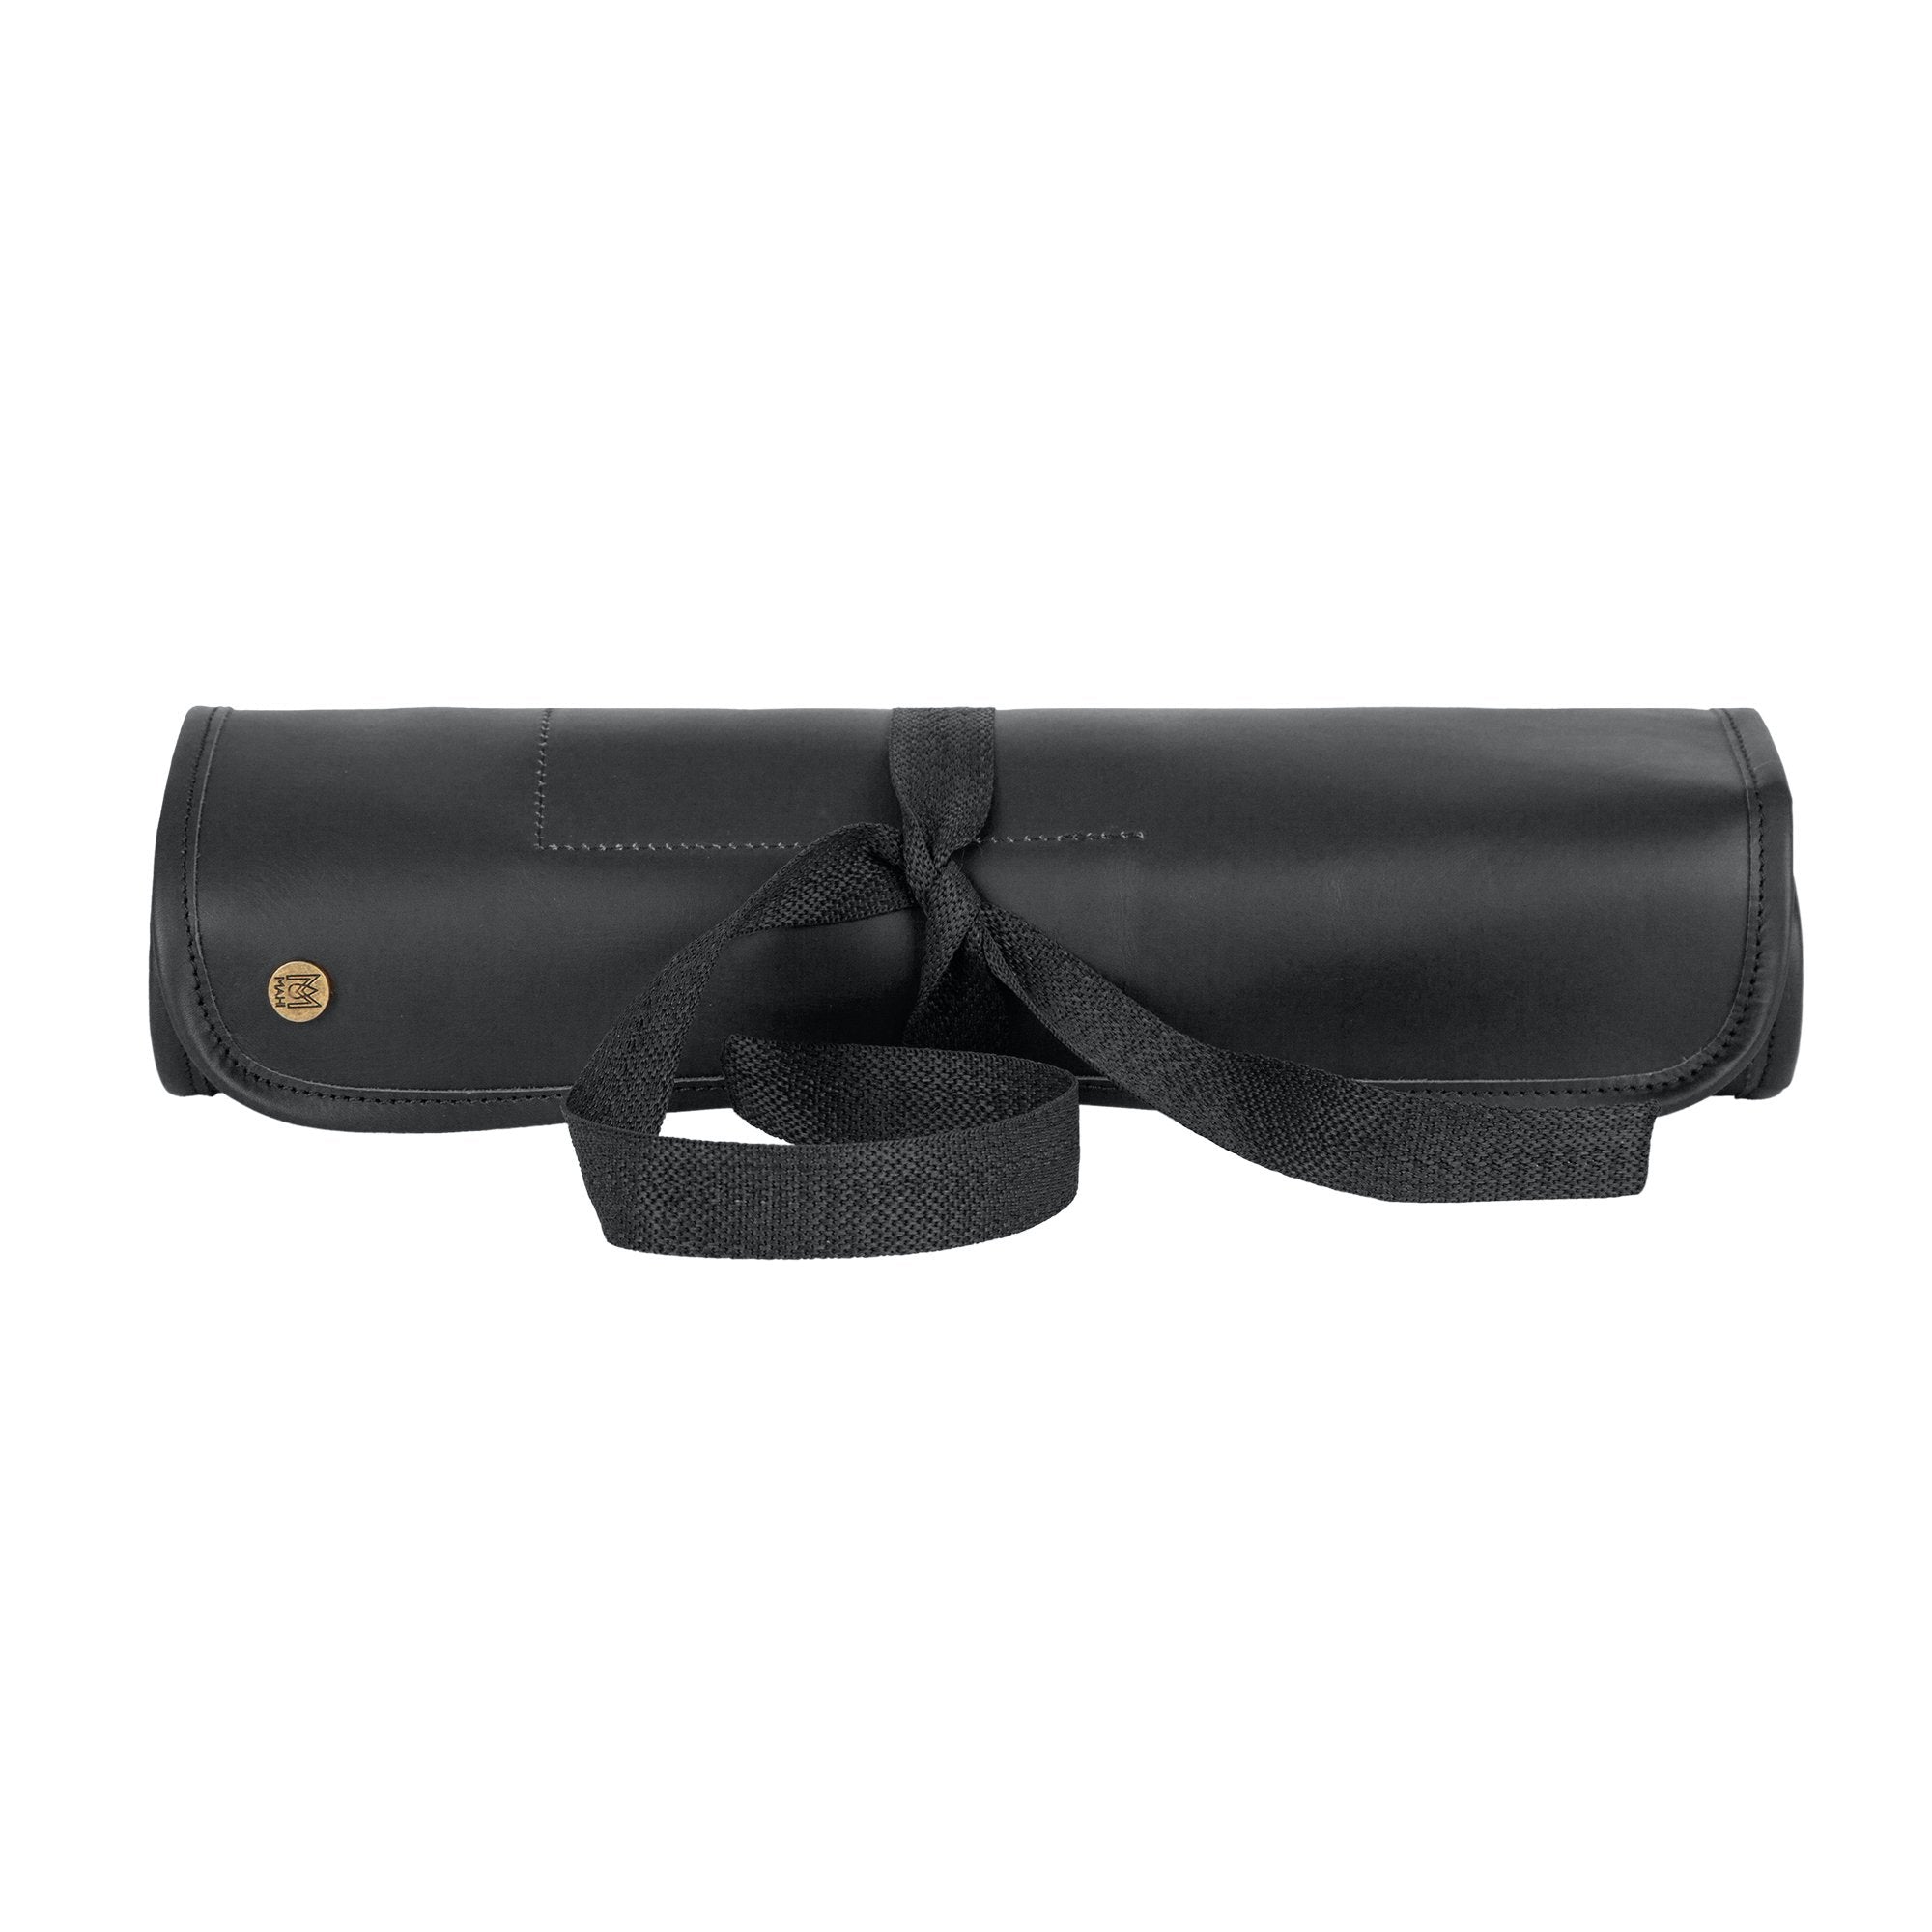 Black Leather Knife Roll for Home Chefs and Professionals – MAHI Leather